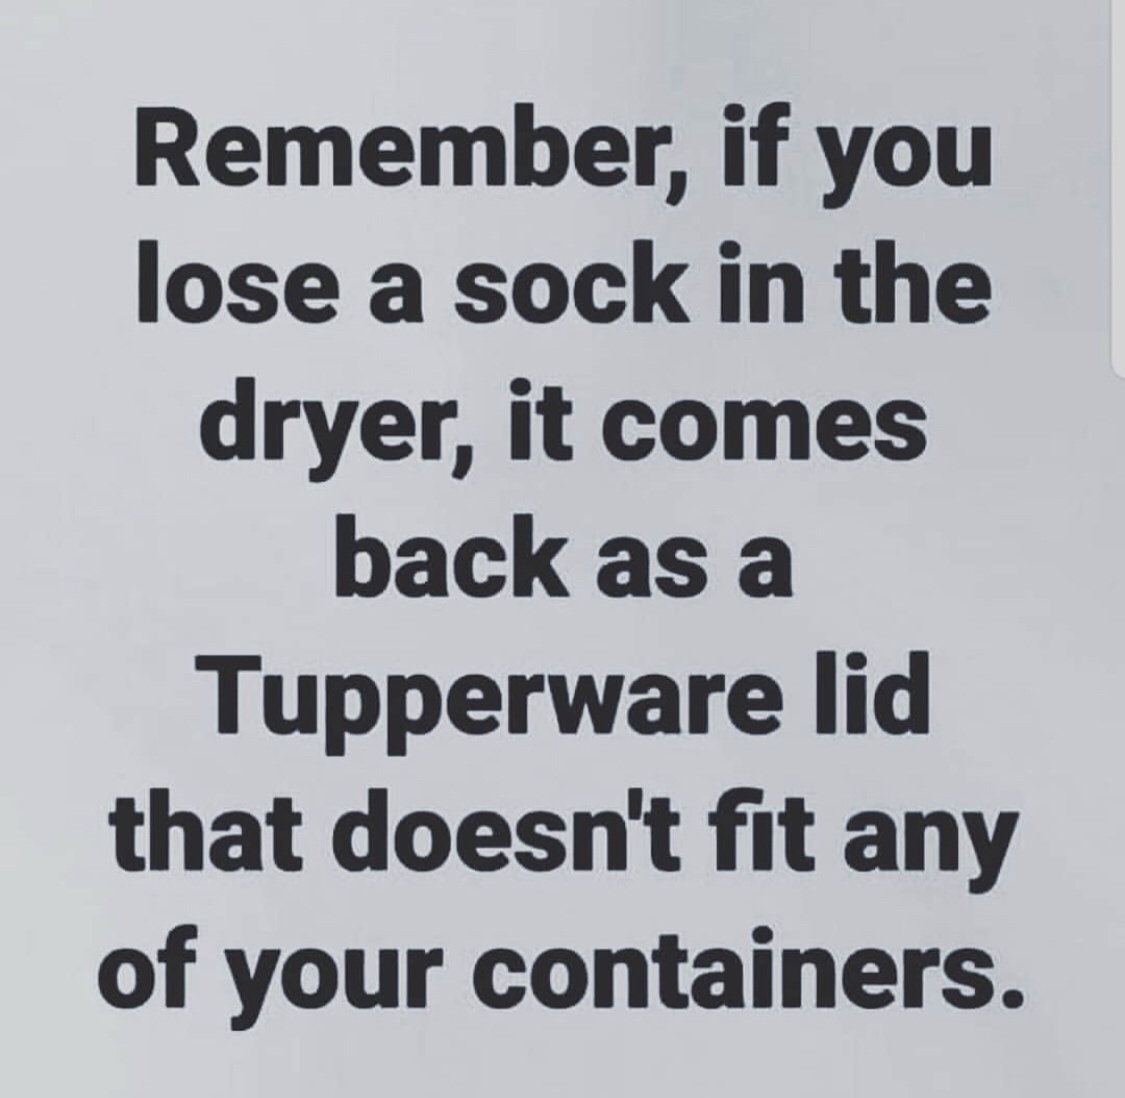 random pic quotes funny - Remember, if you lose a sock in the dryer, it comes back as a Tupperware lid that doesn't fit any of your containers.